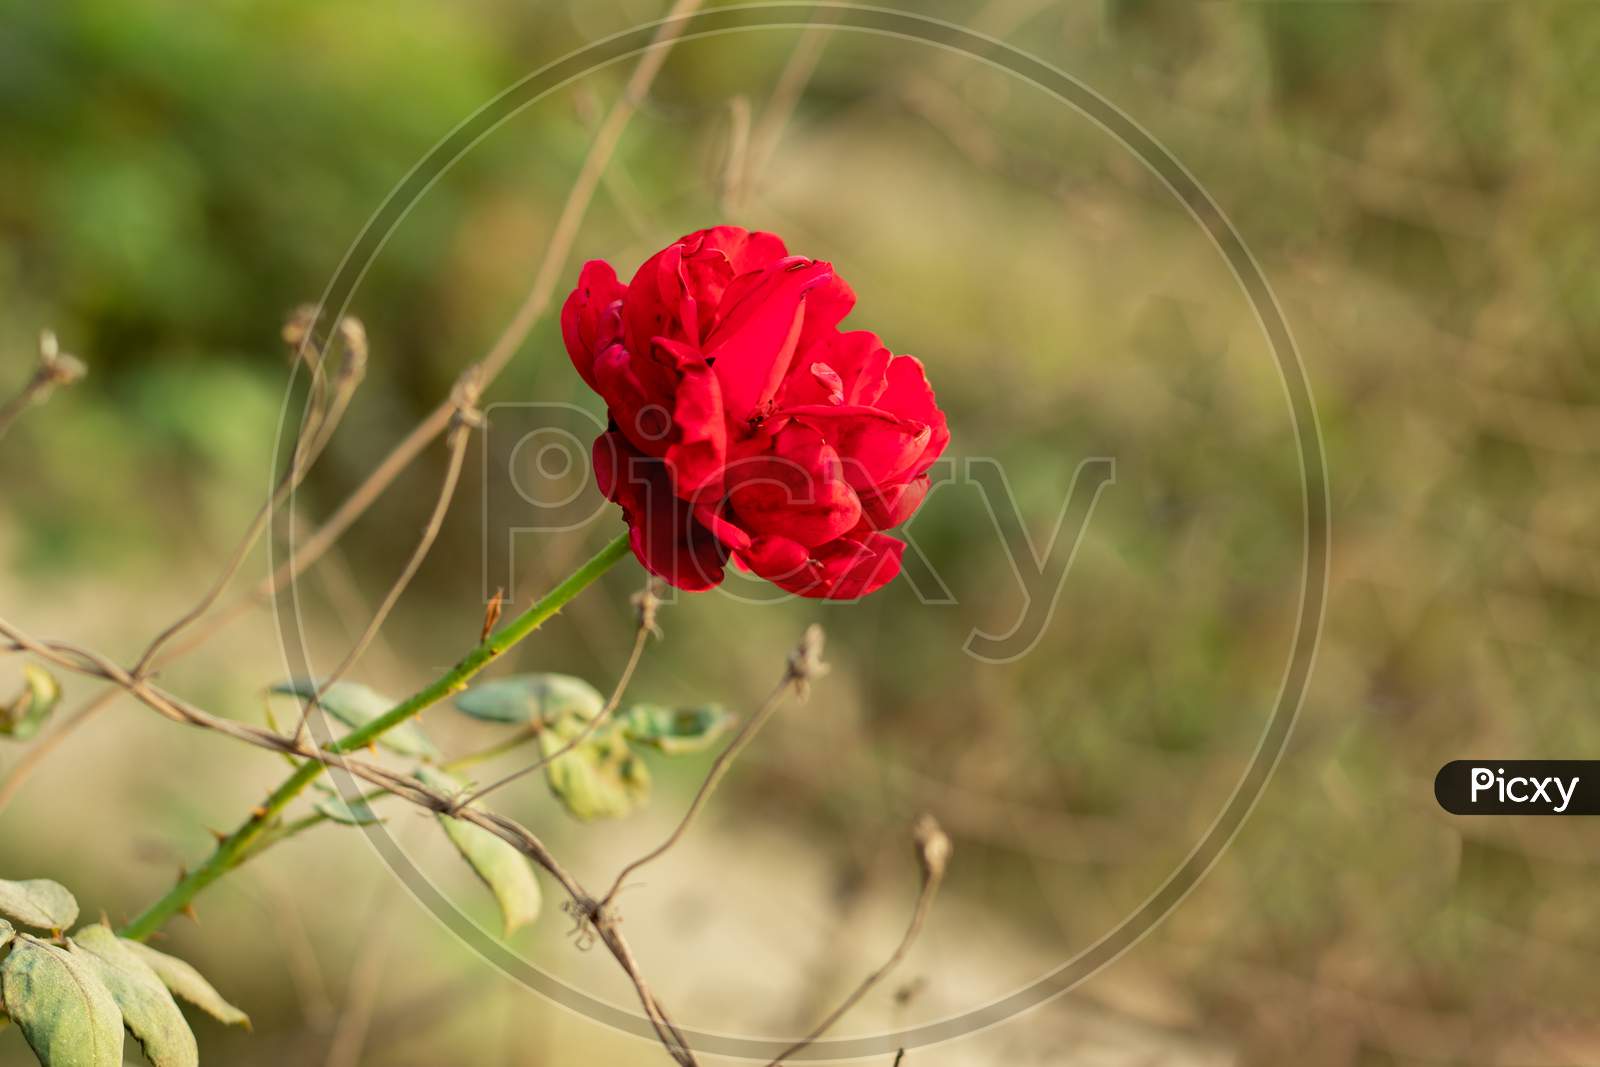 A Red Rose Flower Also Conveys Other Feelings Such As Beauty